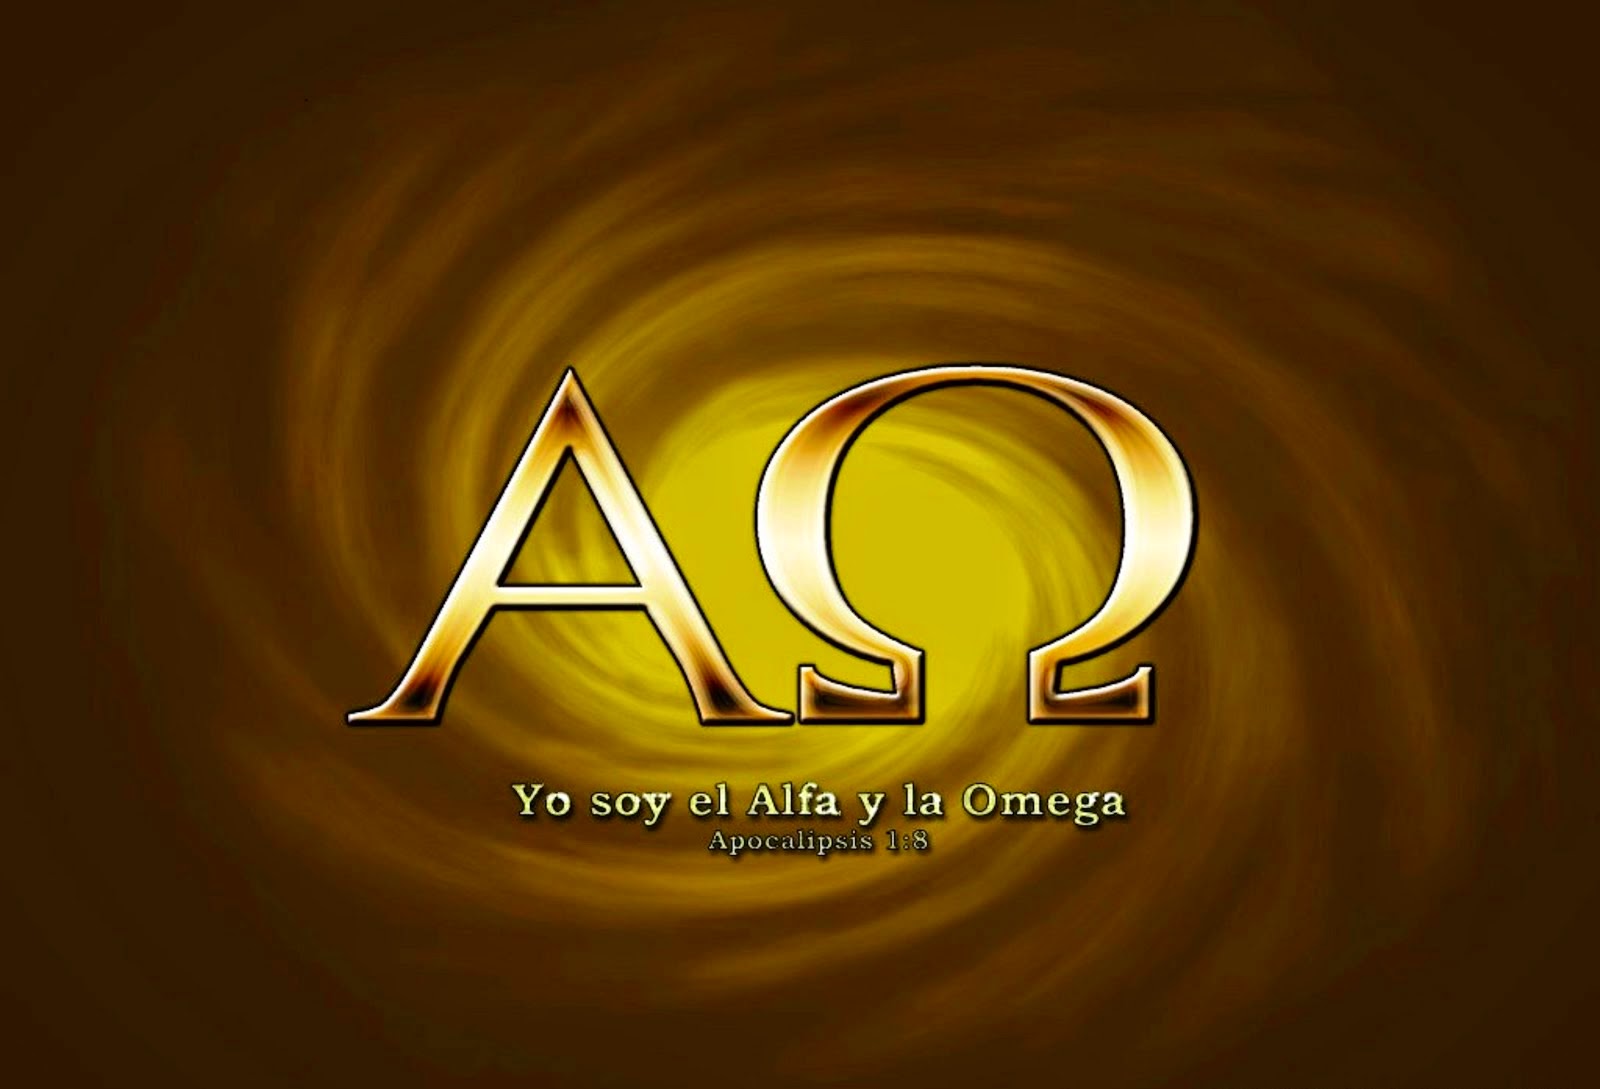 I'AM THE ALPHA AND THE OMEGA - THE BEGINING AND THE END